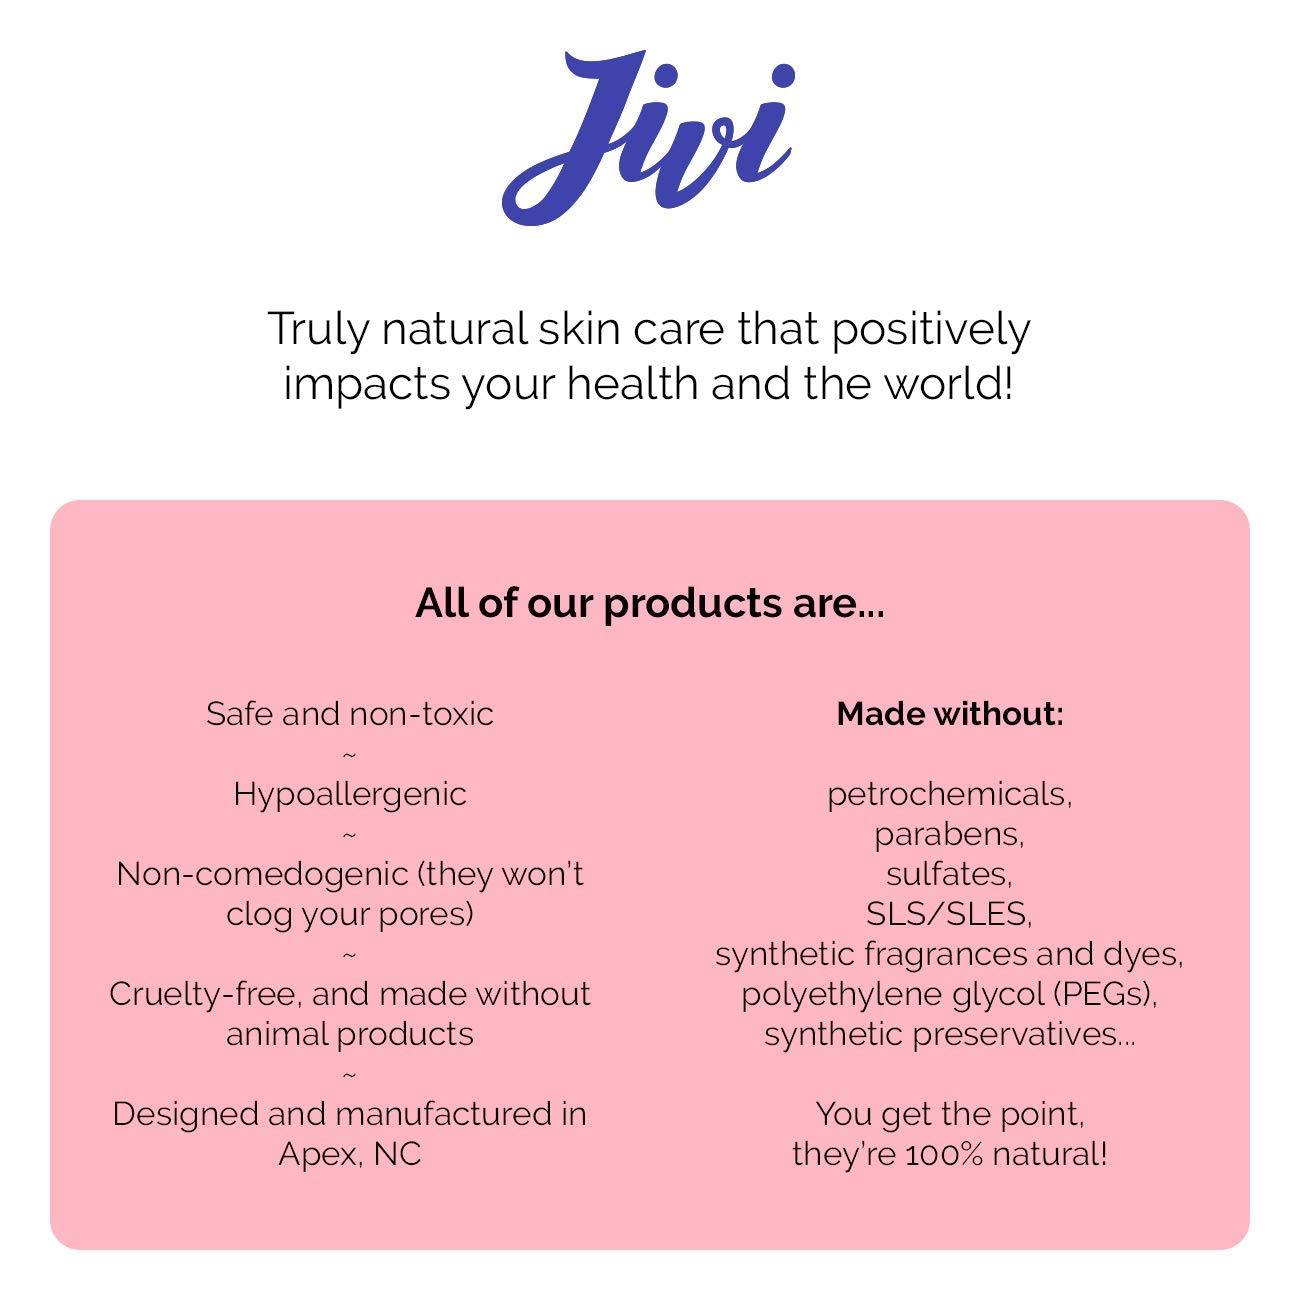 Jivi Hydrating Acne Treatment (Grapefruit) | Spot Treatment that Eliminates Breakouts and Scarring | 100% Natural with Organic Ingredients | For All Skin Types Including Sensitive Skin | 1.7 fl. oz.